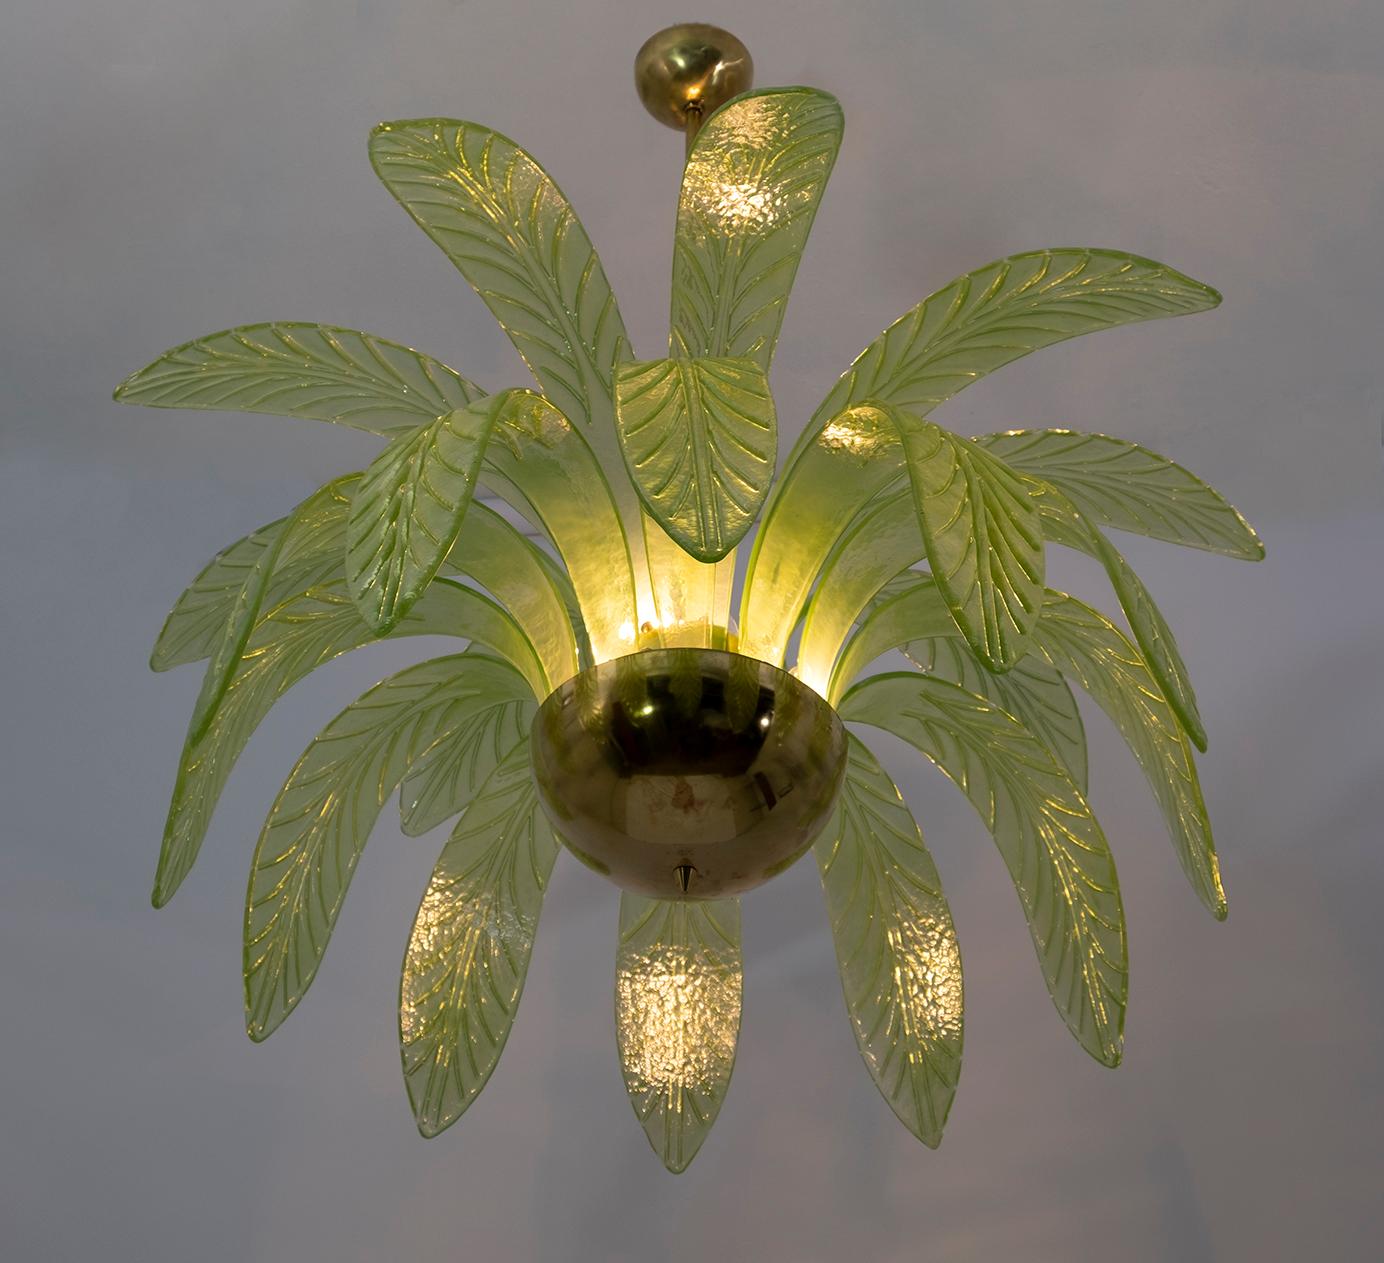 Mouth blown Murano glass chandelier, green Murano glass leaves, brass structure, three bulbs.
The chandelier reproduces the crown of a palm tree.
We supply reducers for USA E12 bulbs.